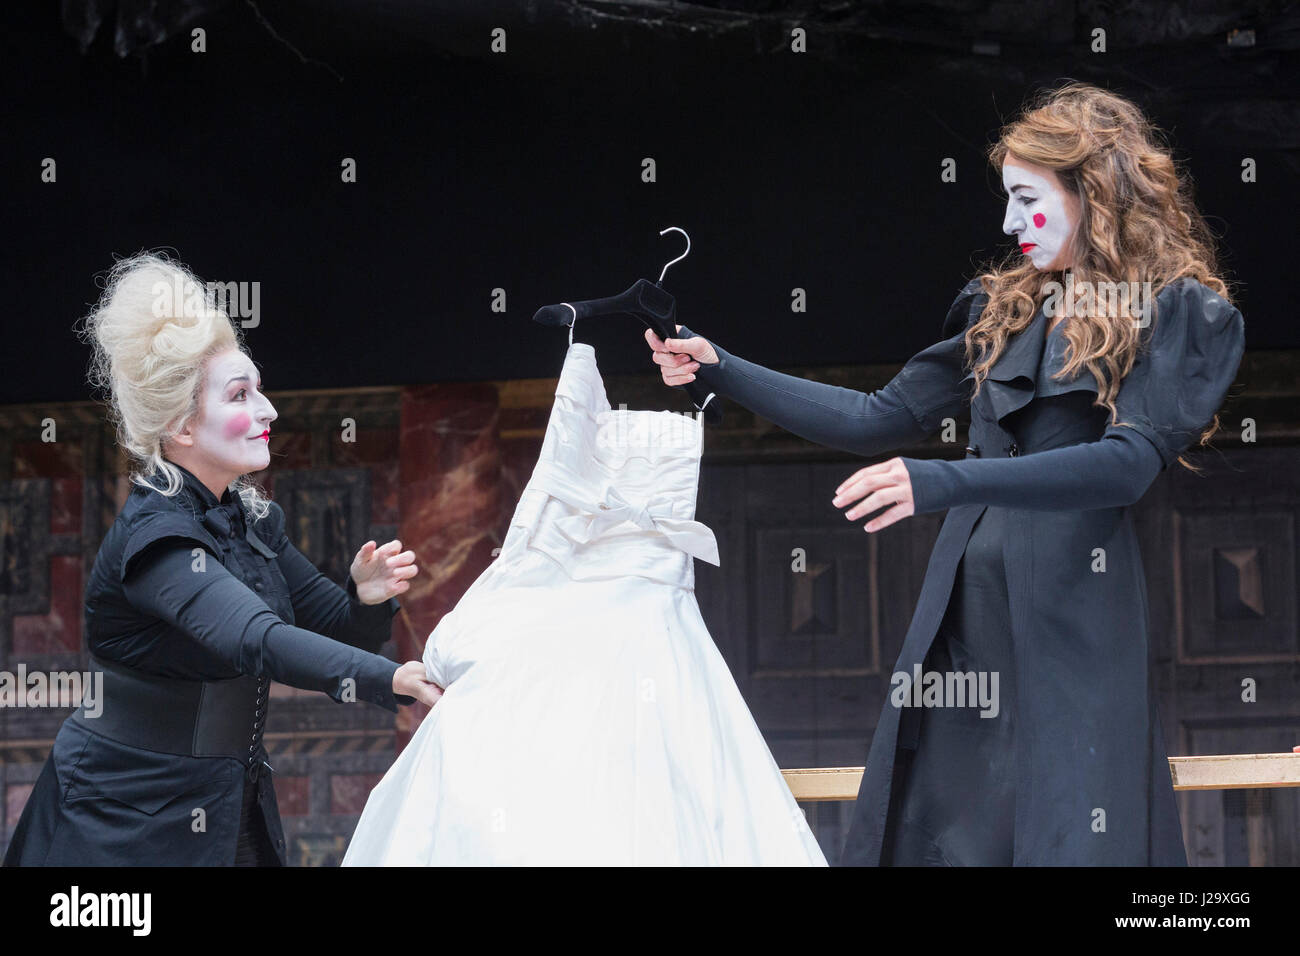 London, UK. 26 April 2017. L-R: Blythe Duff (Nurse), Kirsty Bushell (Juliet). Photocall for the Shakespearen tragedy Romeo and Juliet at the Globe Theatre. The play is directed by Daniel Kramer starring Kirsty Bushell as Julia and Edward Hogg as Romeo. It runs from 22 April to 9 July 2017. Stock Photo